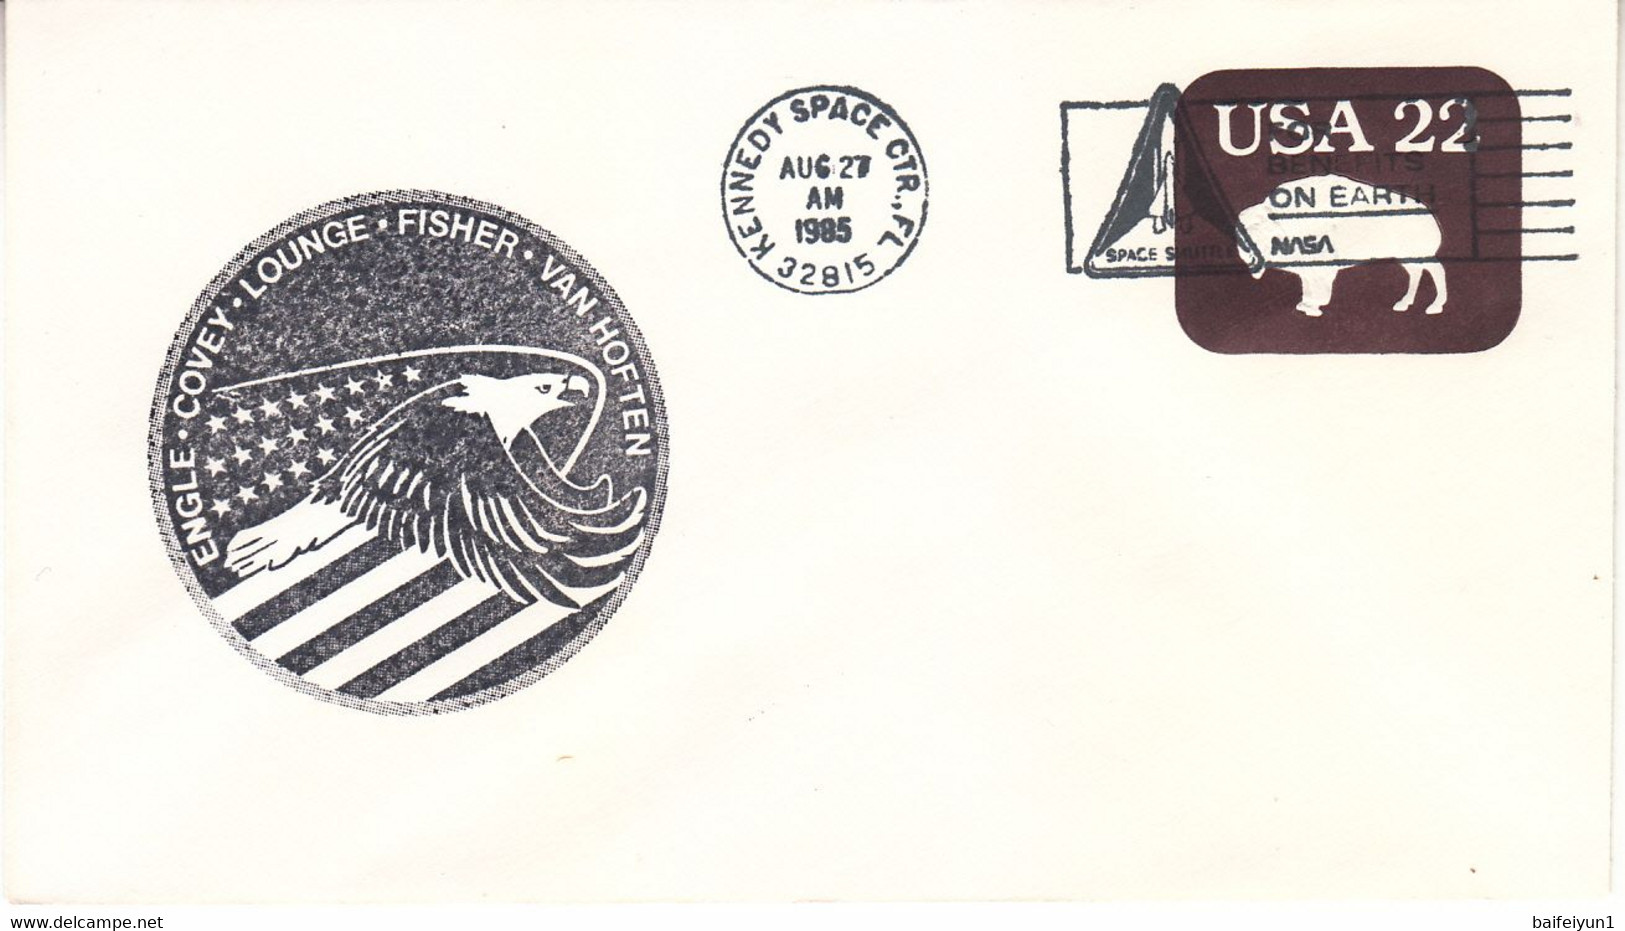 1985 USA  Space Shuttle Challenger STS-51F Mission And Spaceman Commemorative Cover - North  America